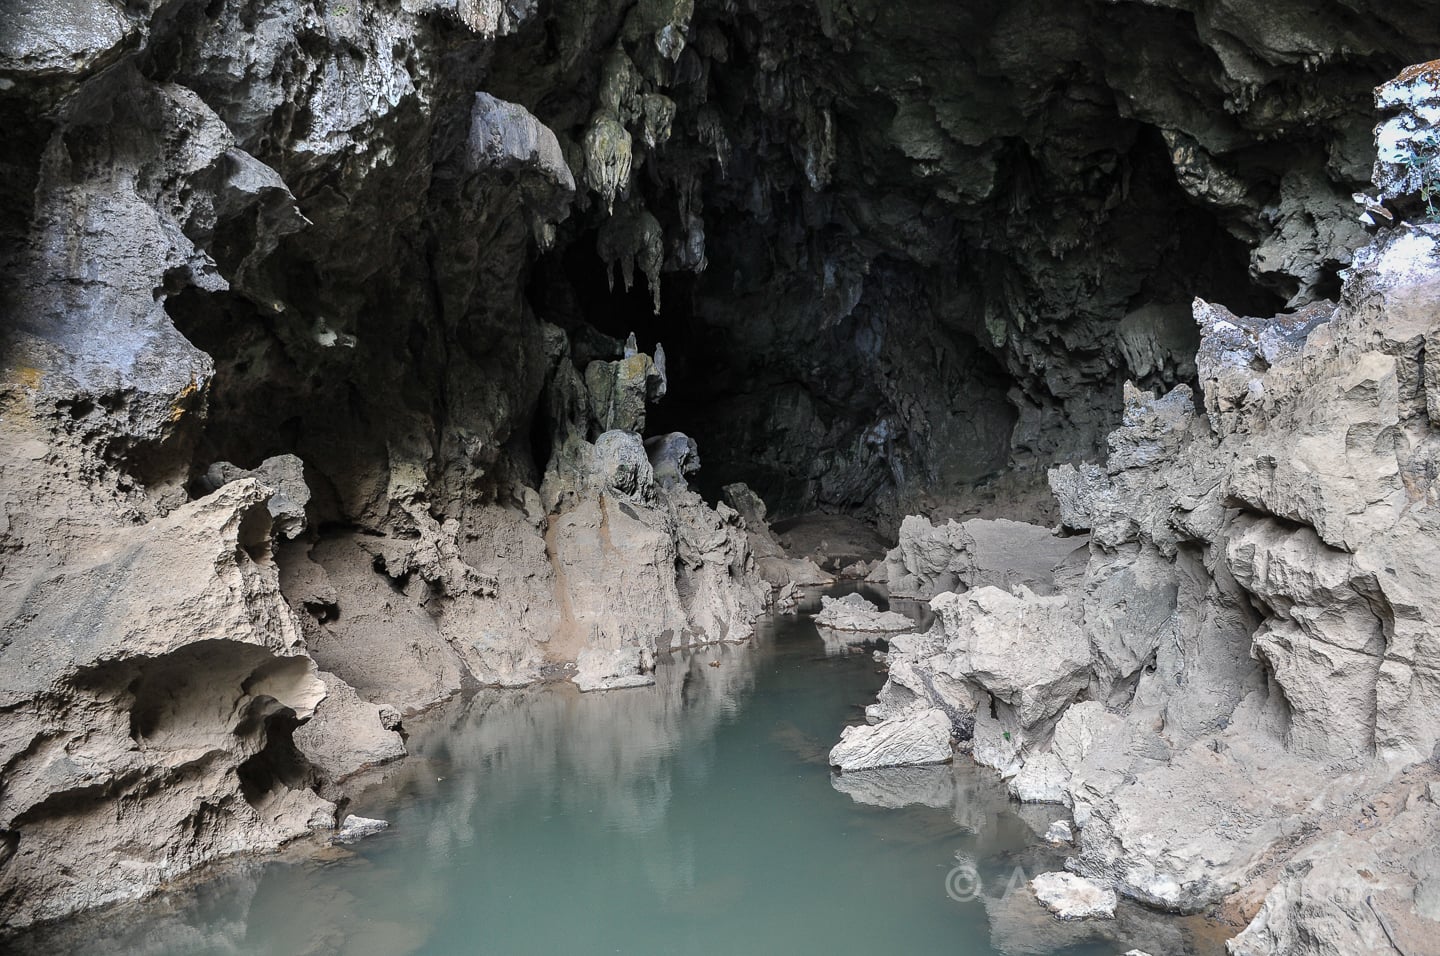 water-filled mouth of a mysterious cave